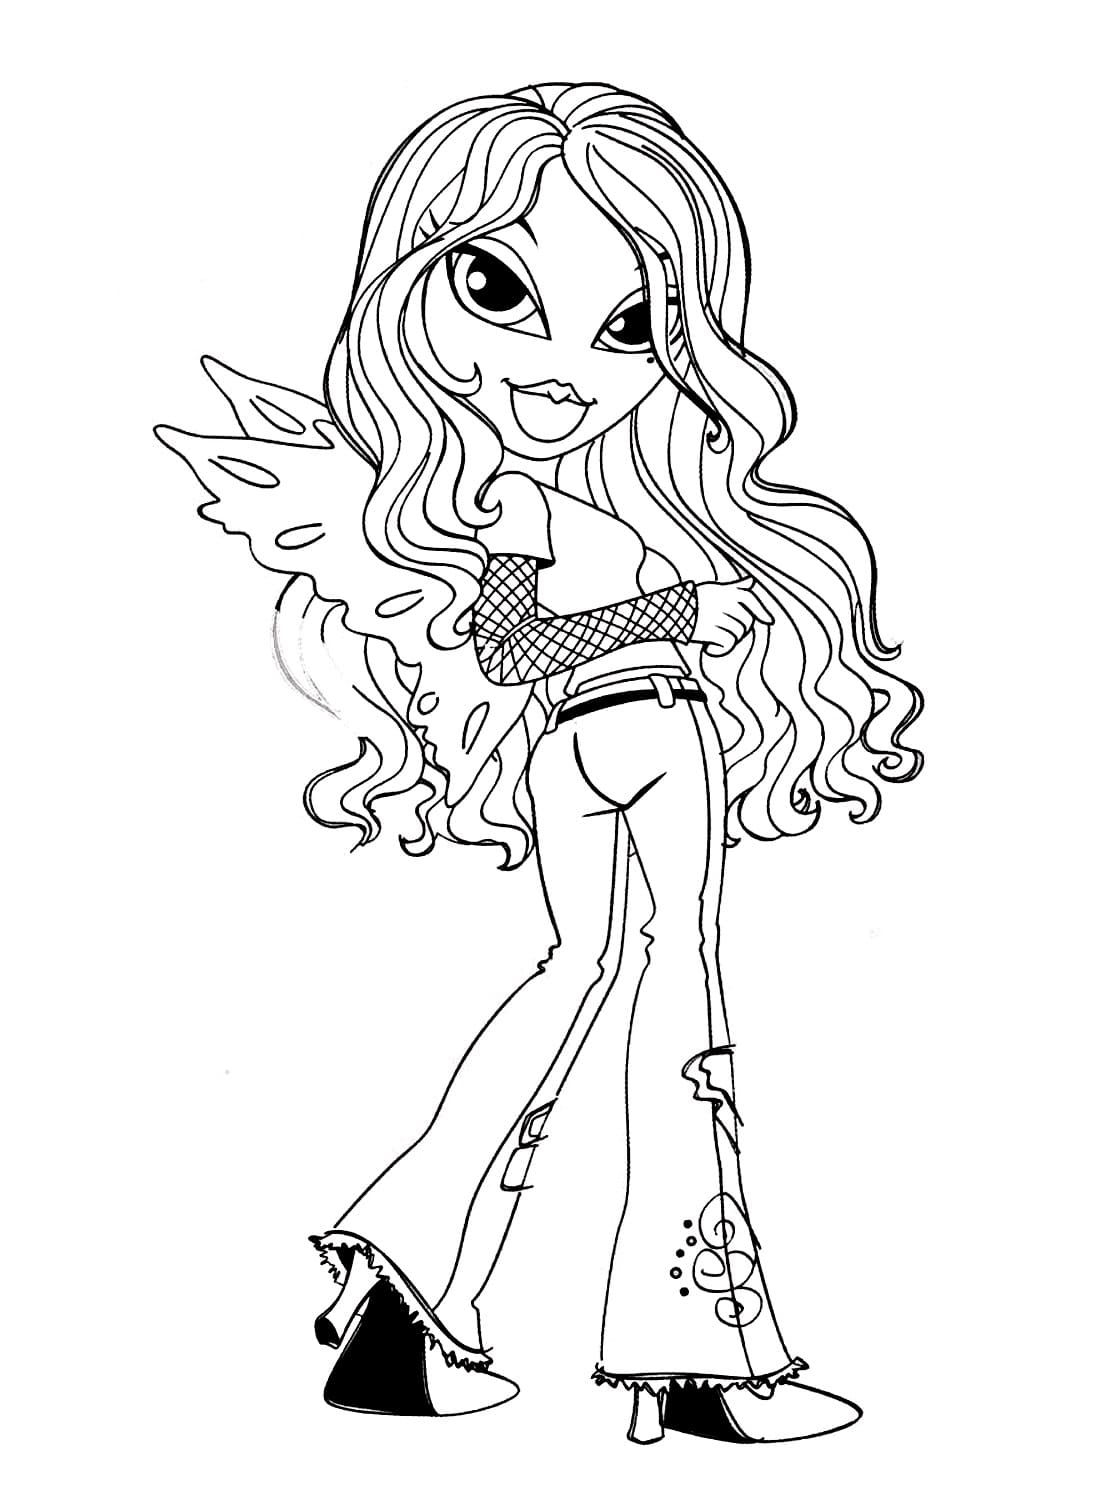 Pretty Sasha Bratz coloring page - Download, Print or Color Online for Free